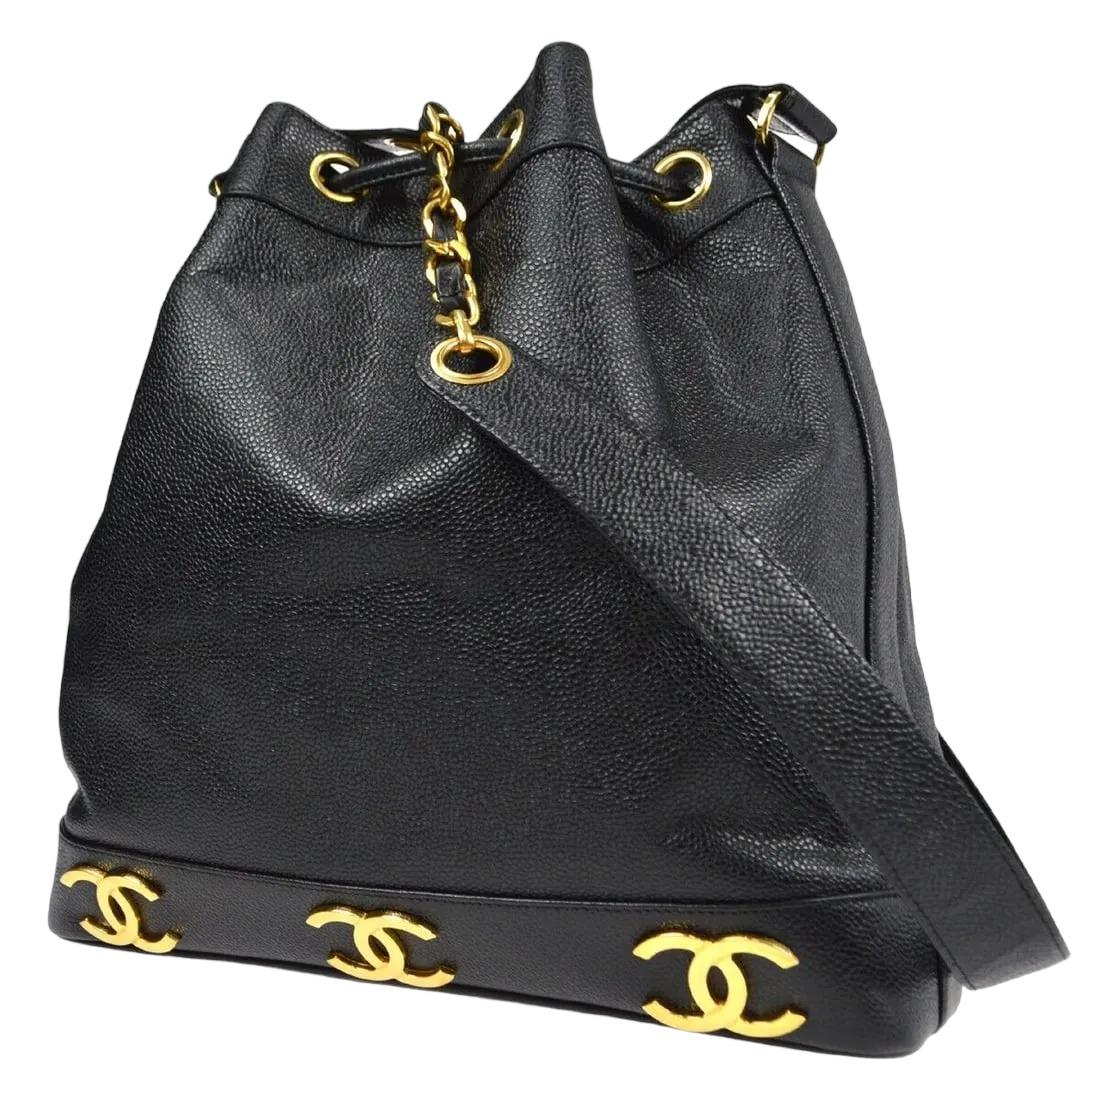 Chanel Six CC Caviar Leather DrawString Pendant Shoulder bag In Excellent Condition For Sale In Pasadena, CA